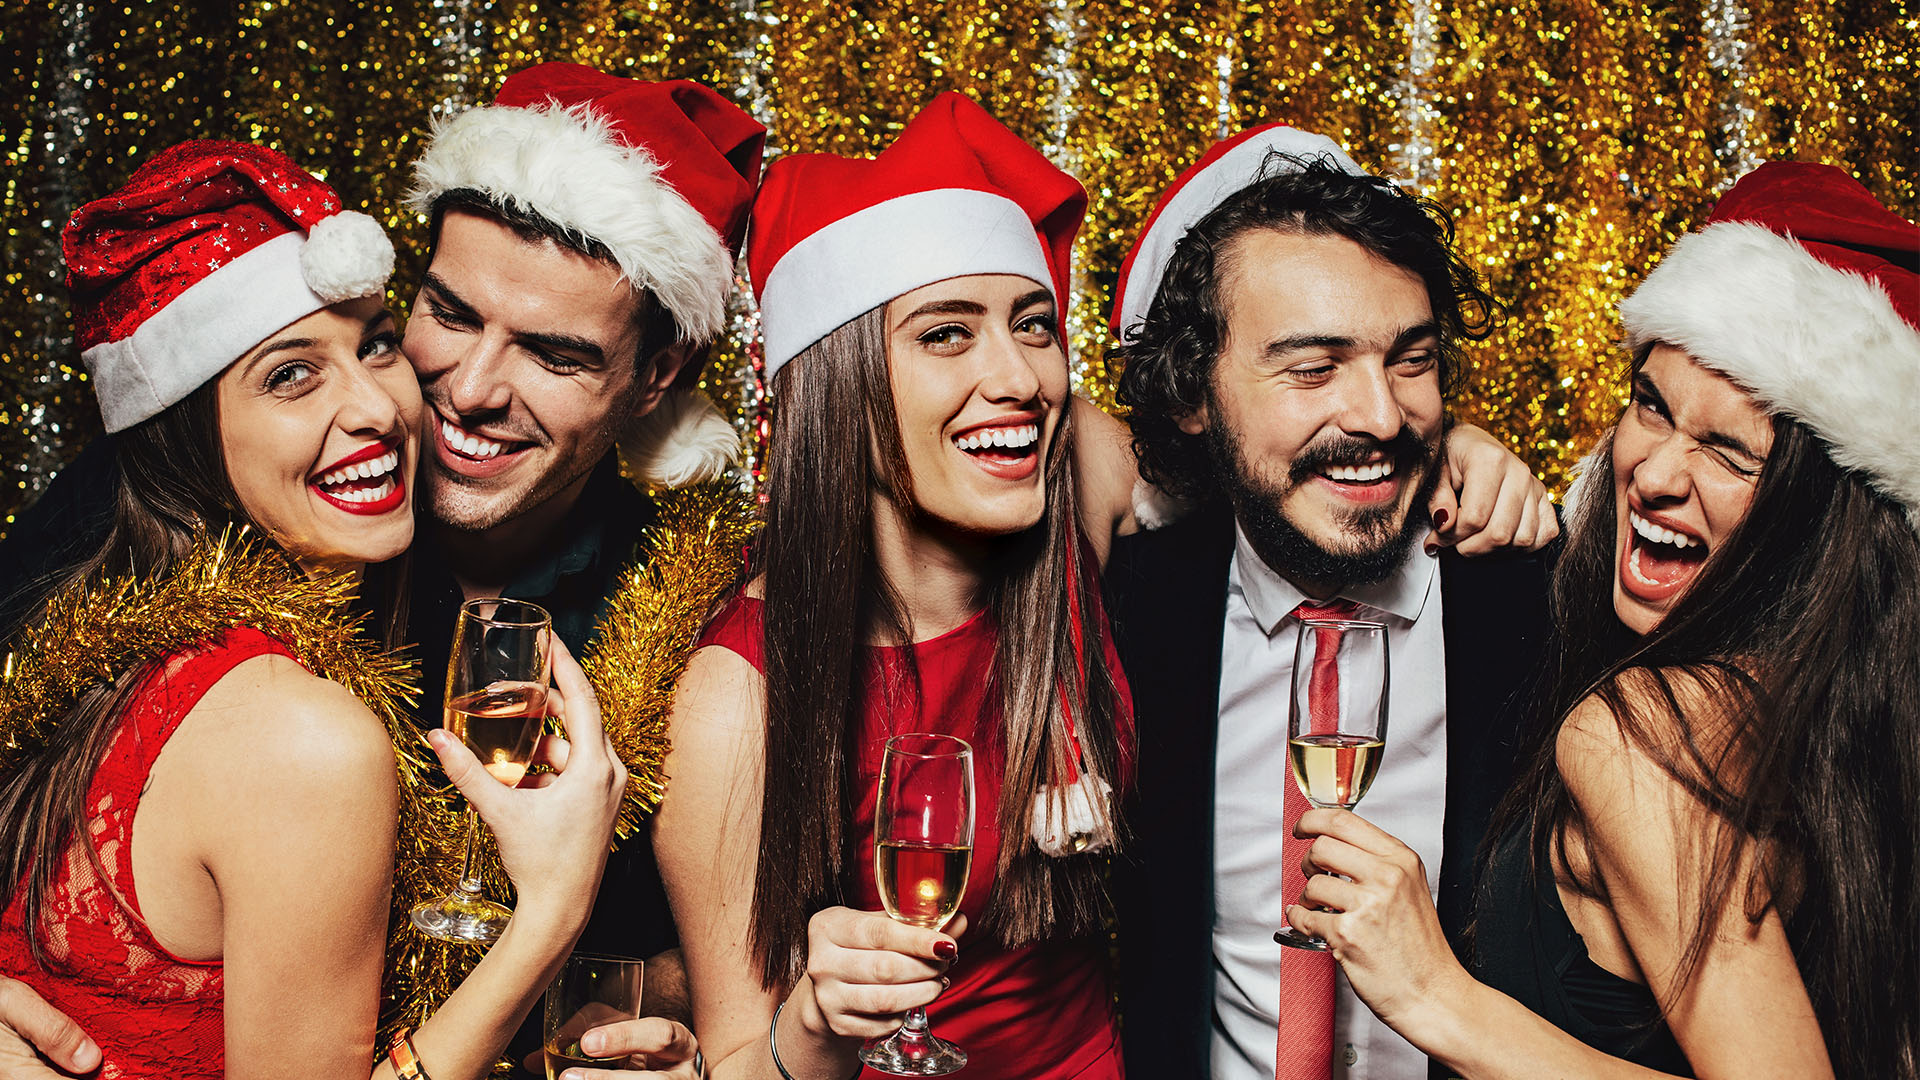 Can I Claim Workers Compensation if I Get Injured at The Christmas Party?